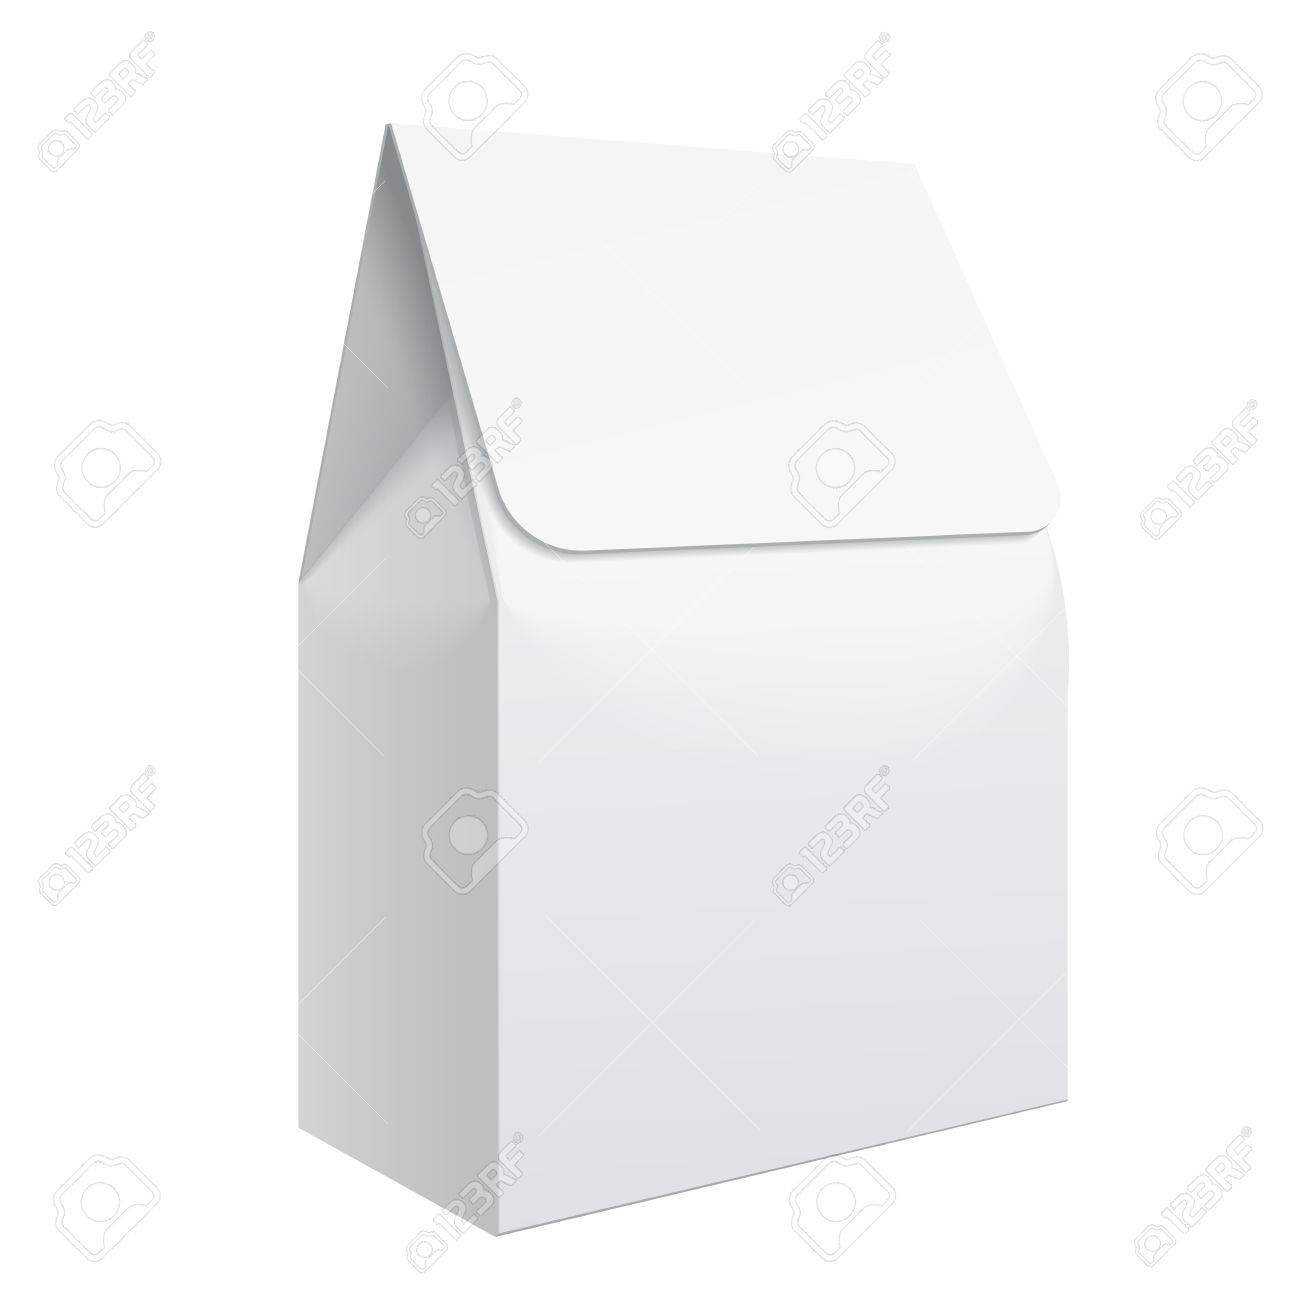 Realistic White Blank Template Packaging For Food. Food Packing.. With Regard To Blank Packaging Templates